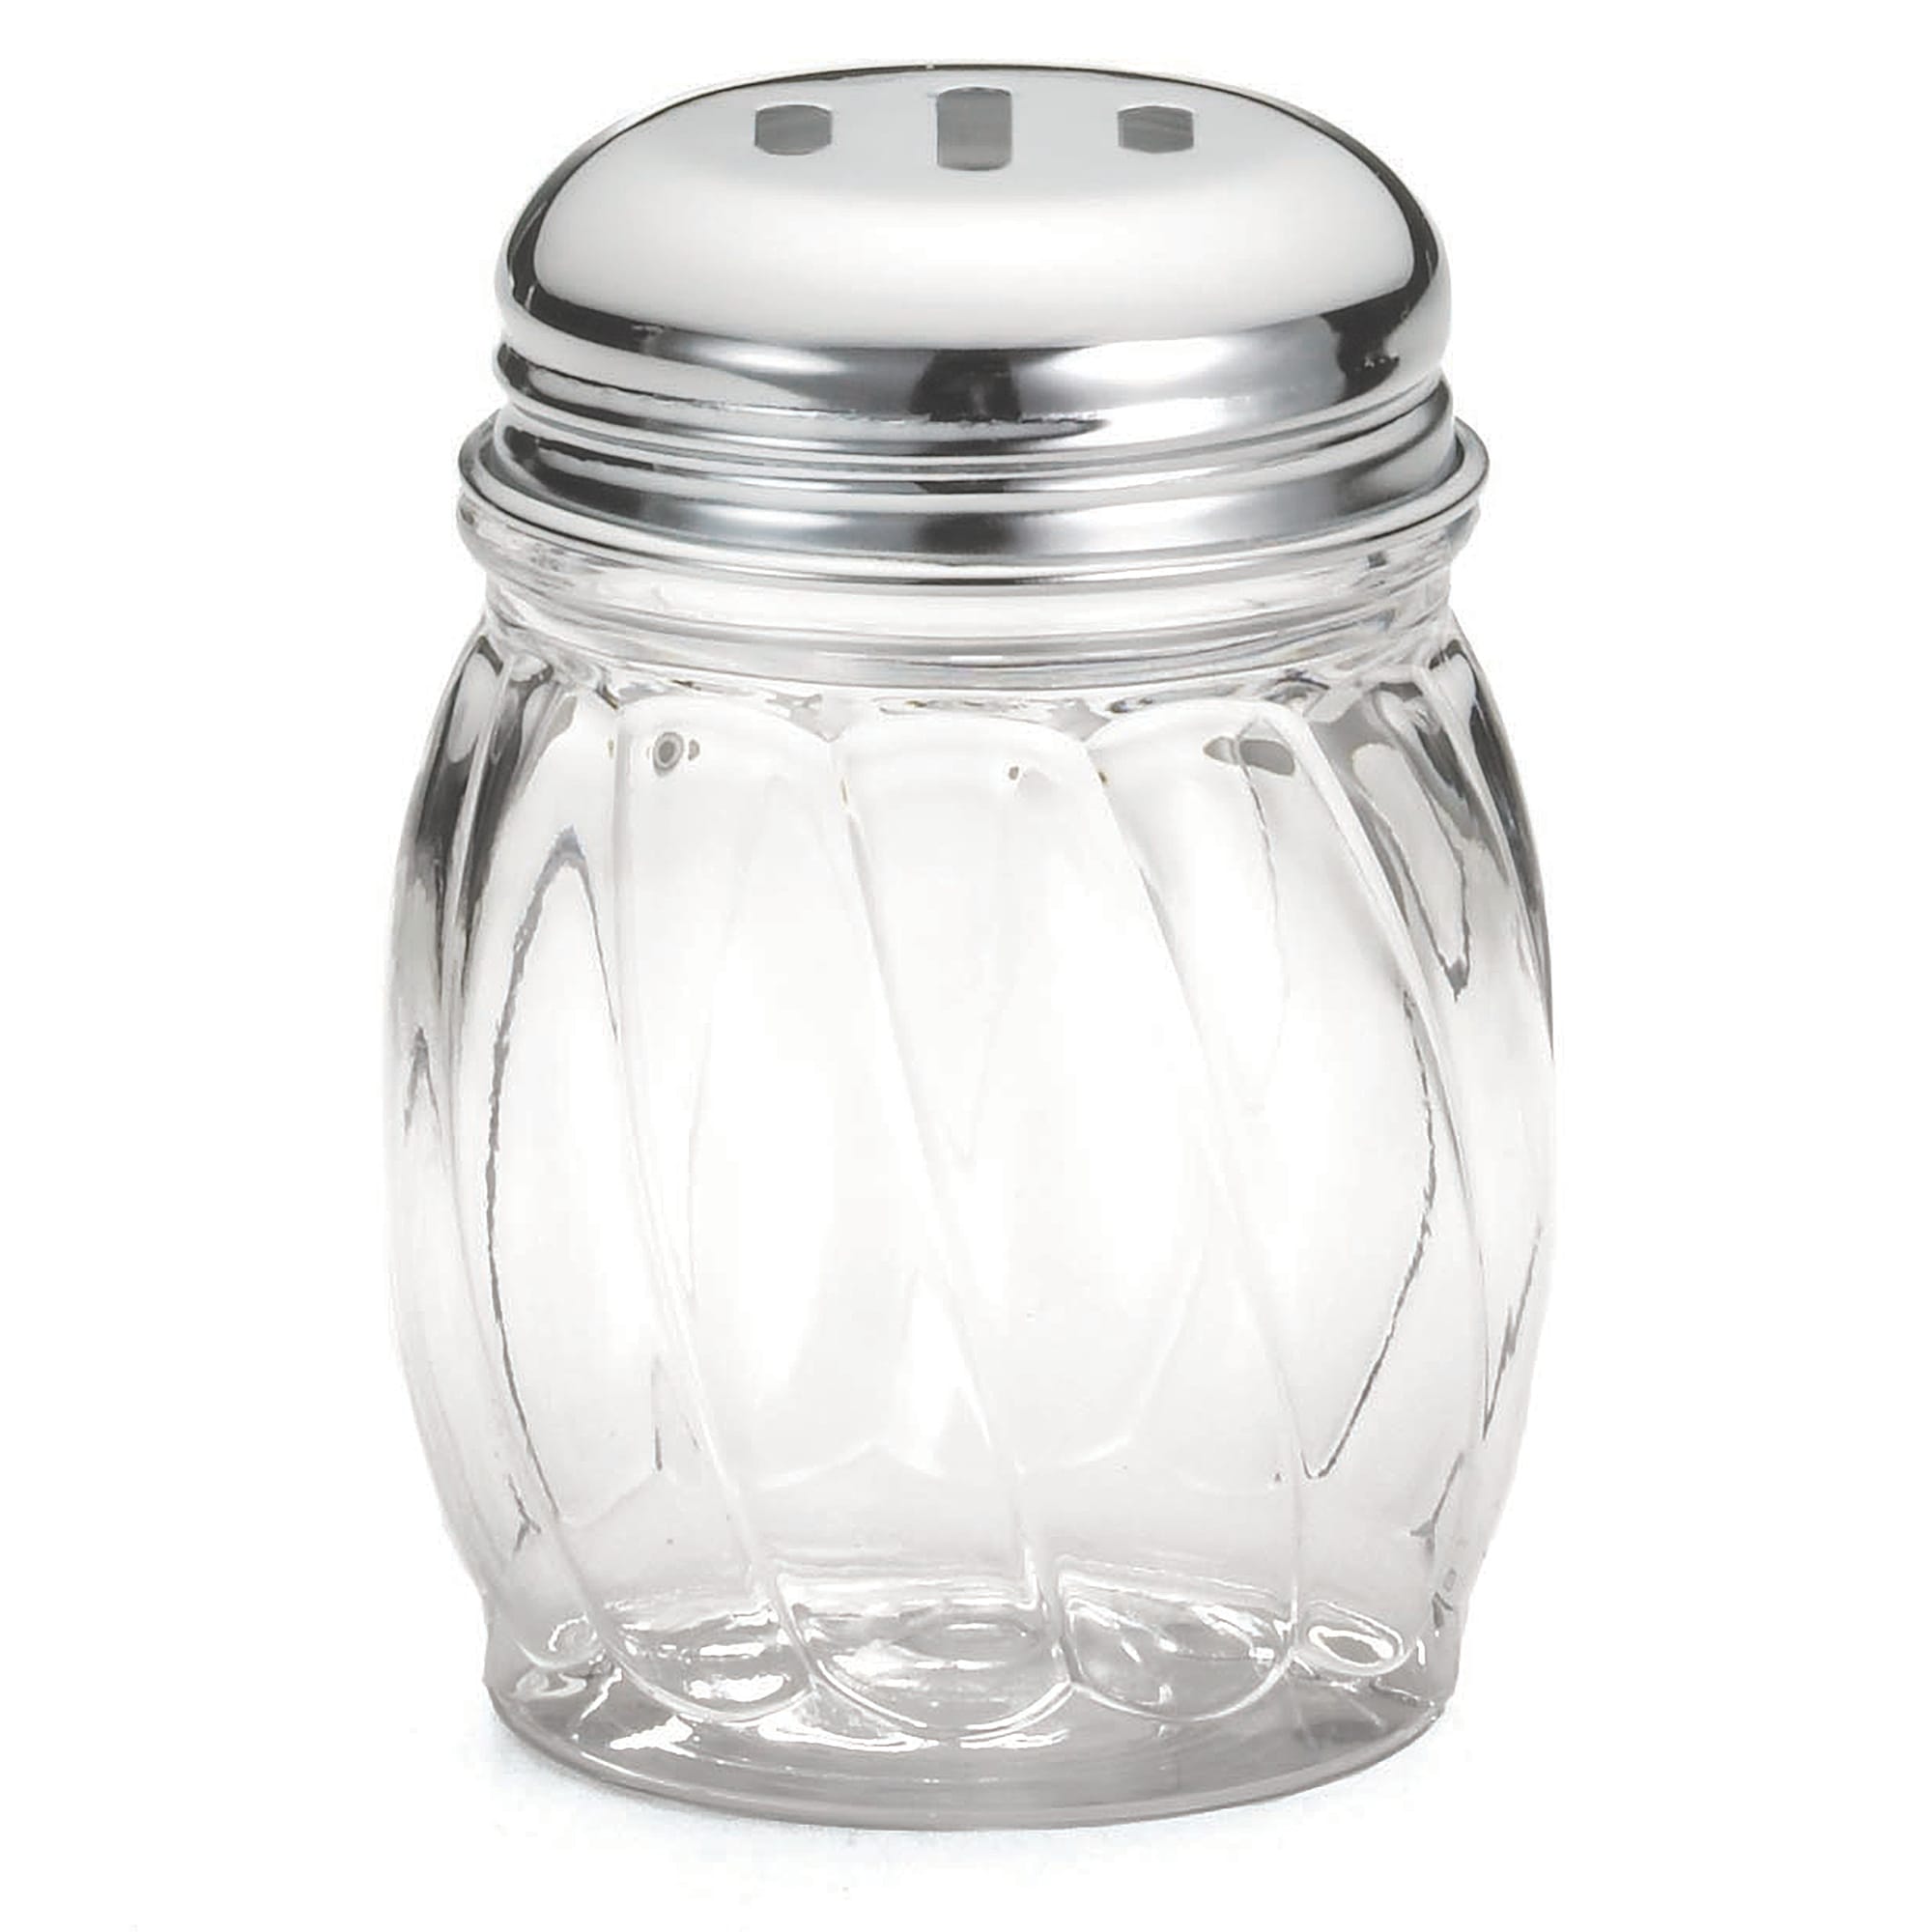 TableCraft P260SL 6 Ounce Swirl Shaker with Slotted Chrome Plated Top